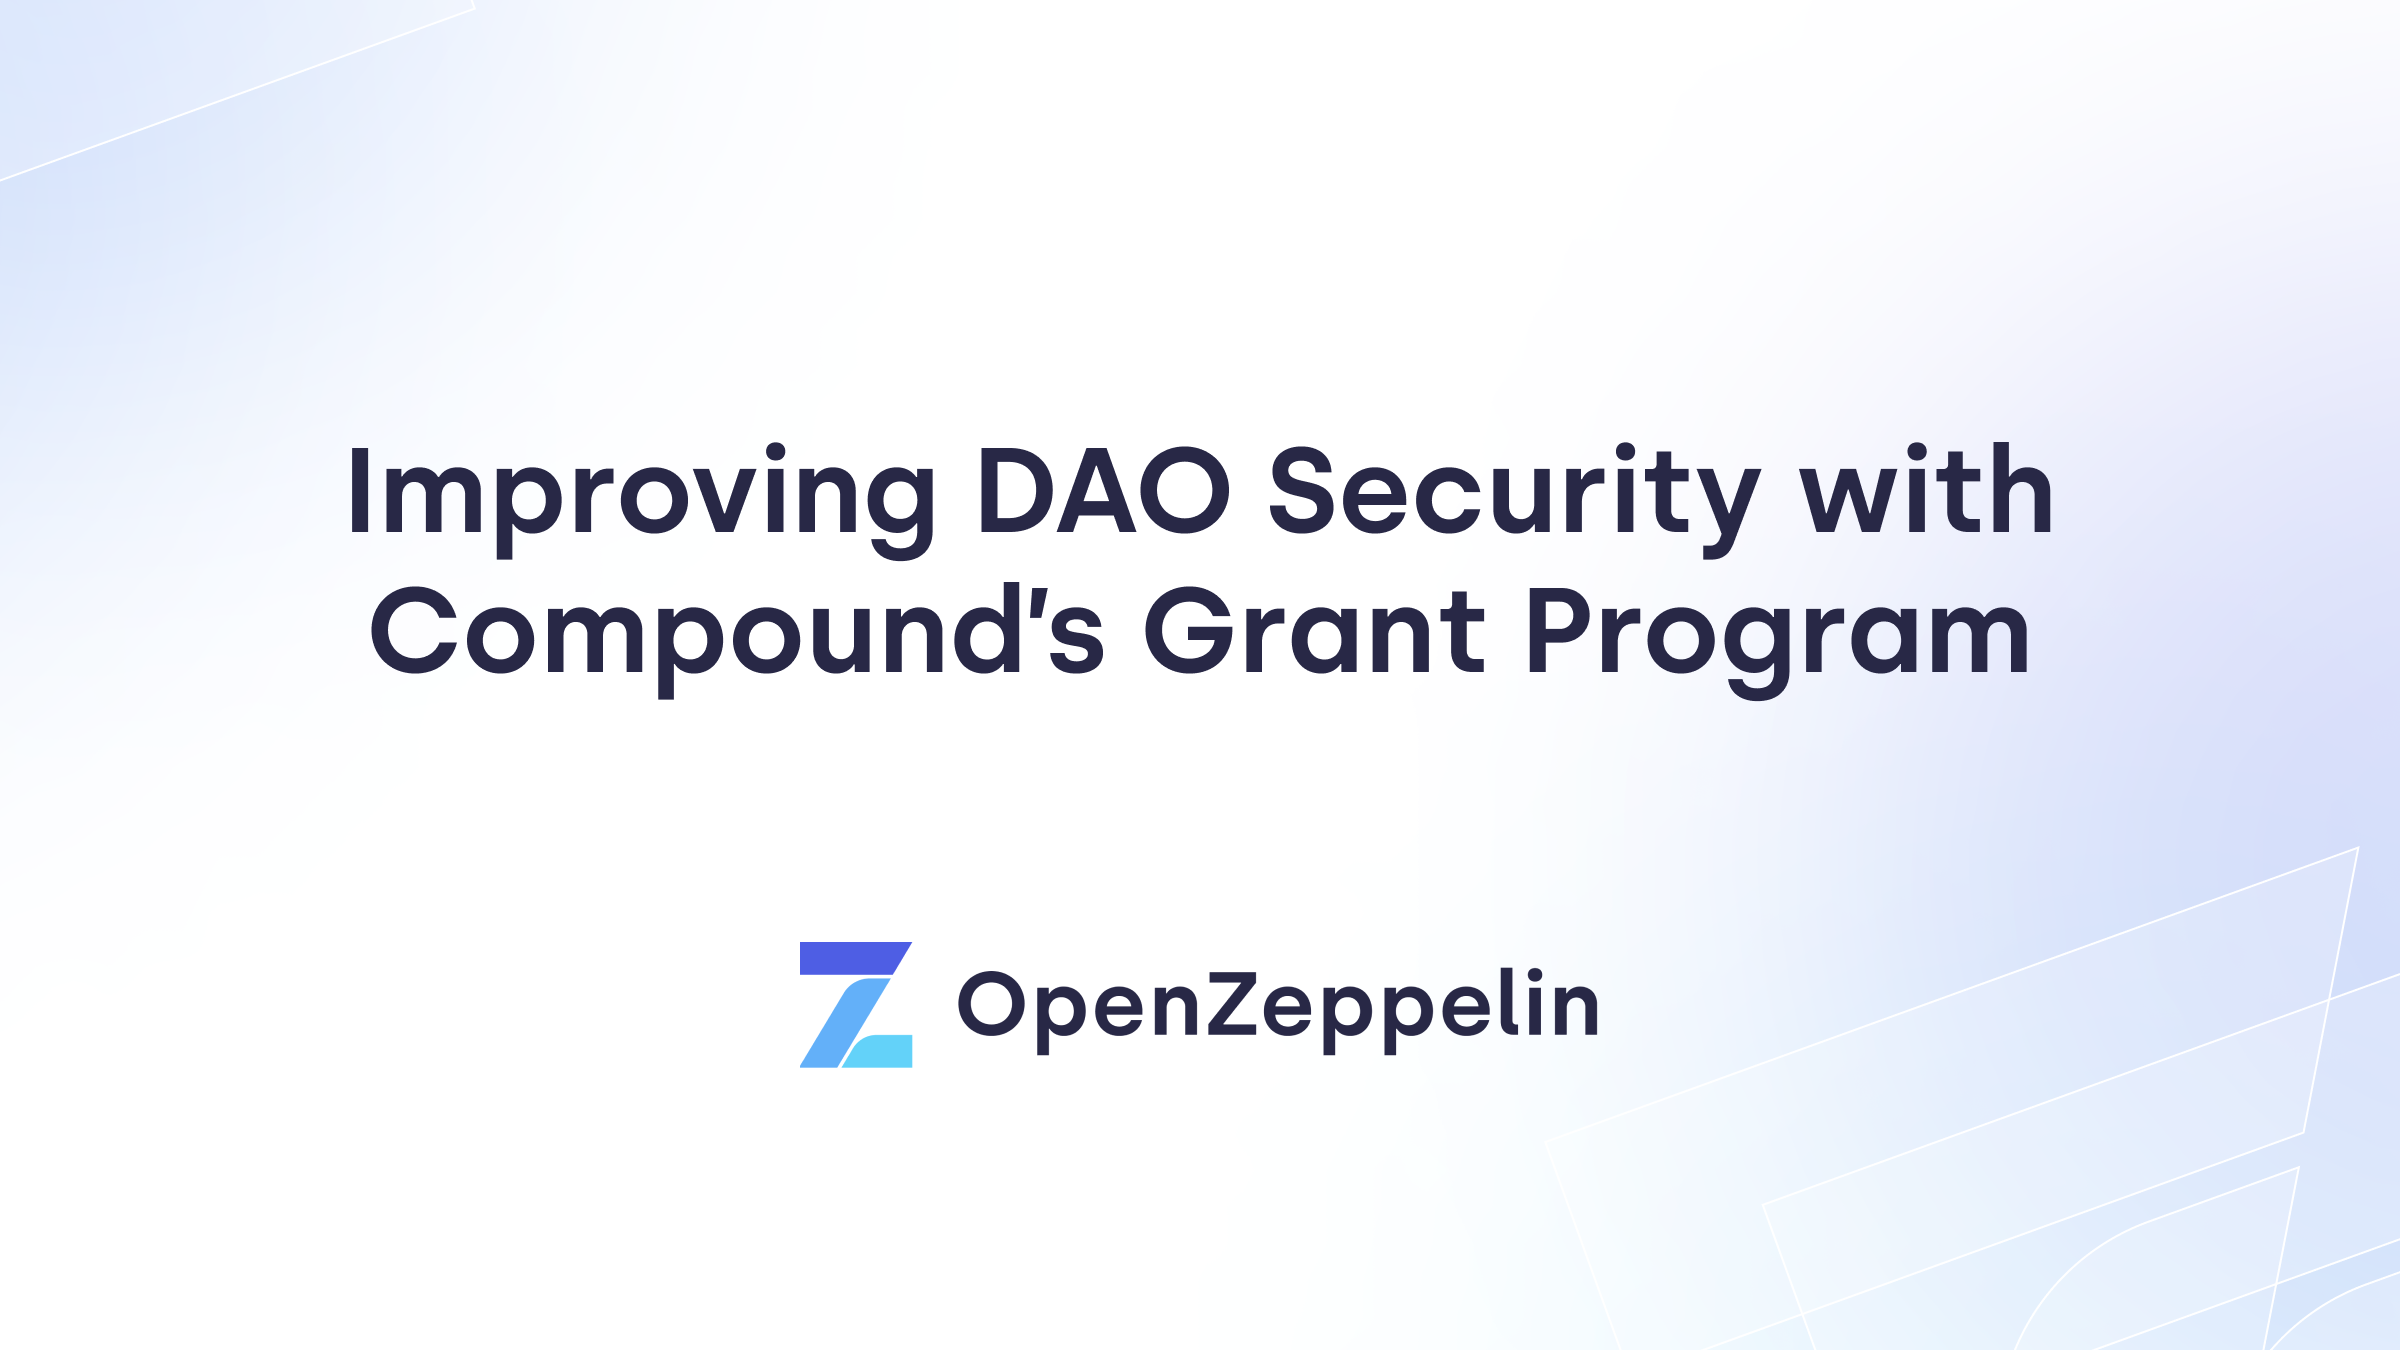 OpenZeppelin Appointed to Review Compound’s Grant Proposals to Improve DAO Security